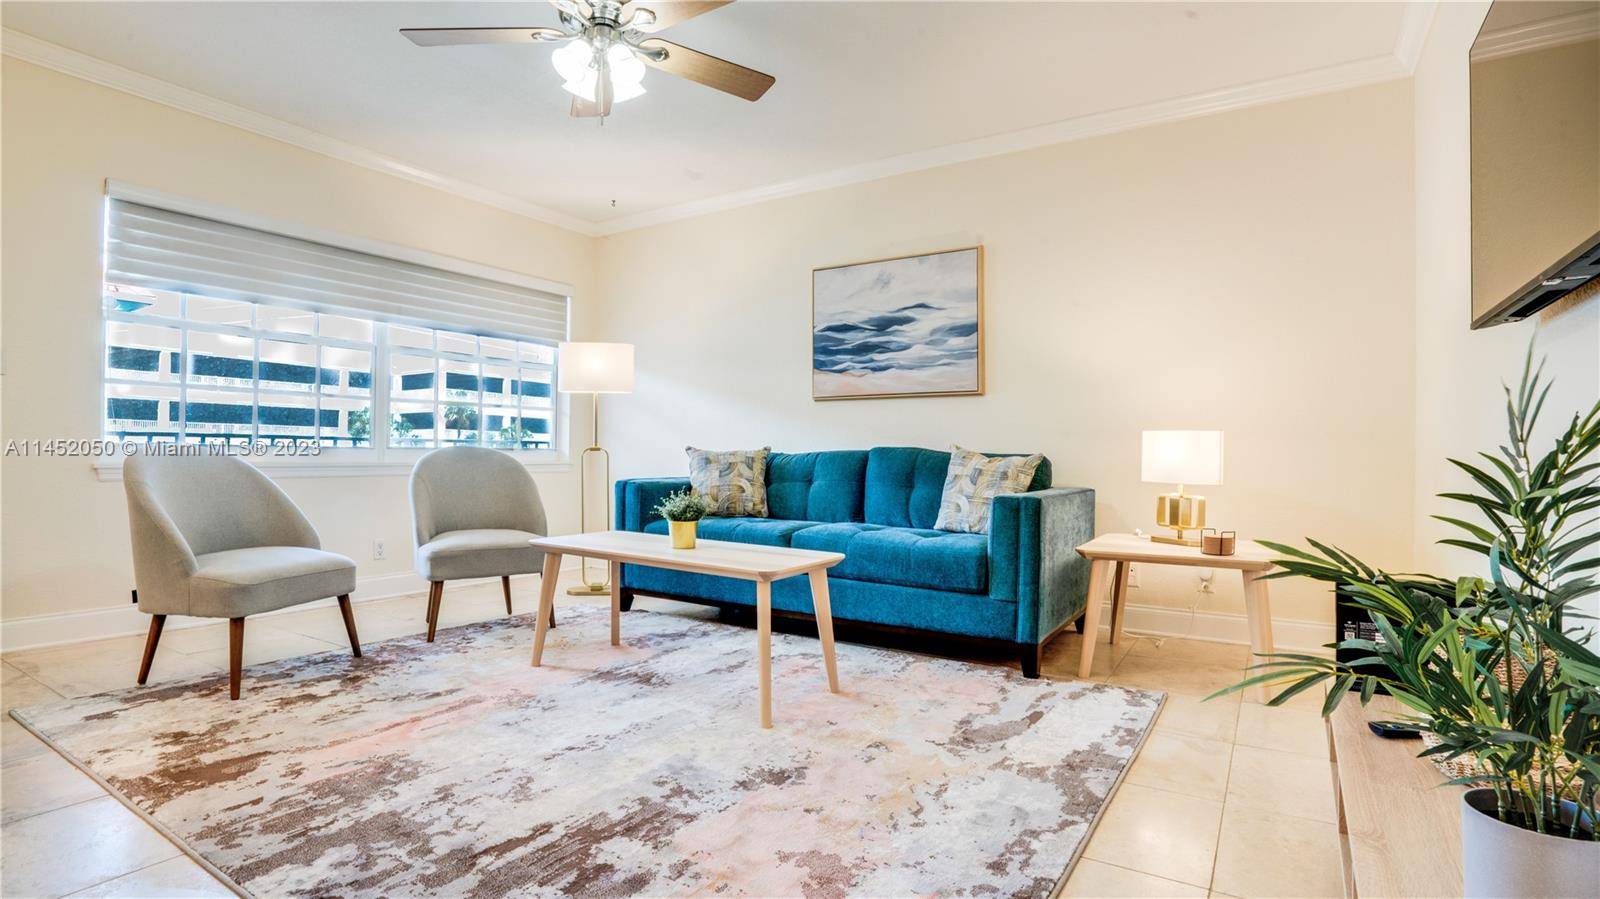 LOOKING FOR SHORT TERM TENANT Experience a tranquil getaway at this high end condo nestled at the Sunrise Intracoastal neighborhood of Fort Lauderdale !